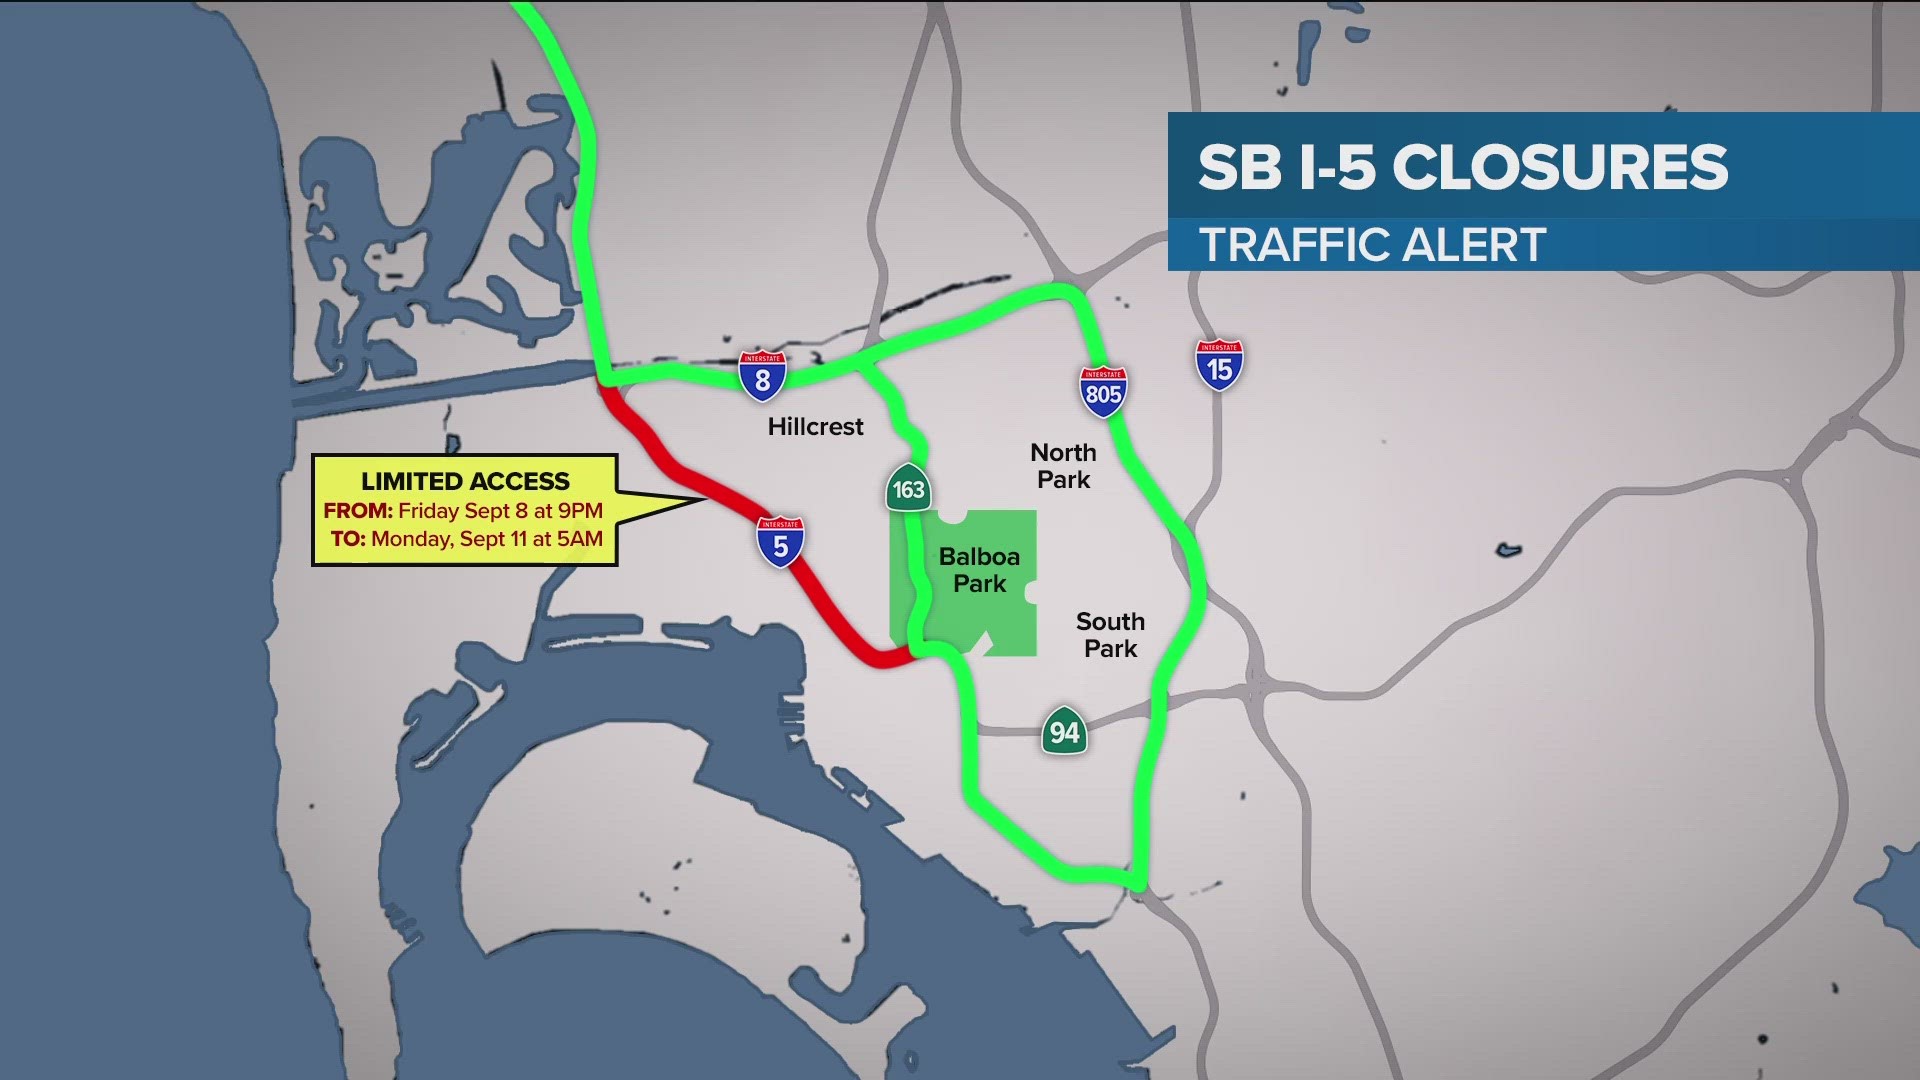 Traffic Alert I5 closures planned by Caltrans in San Diego